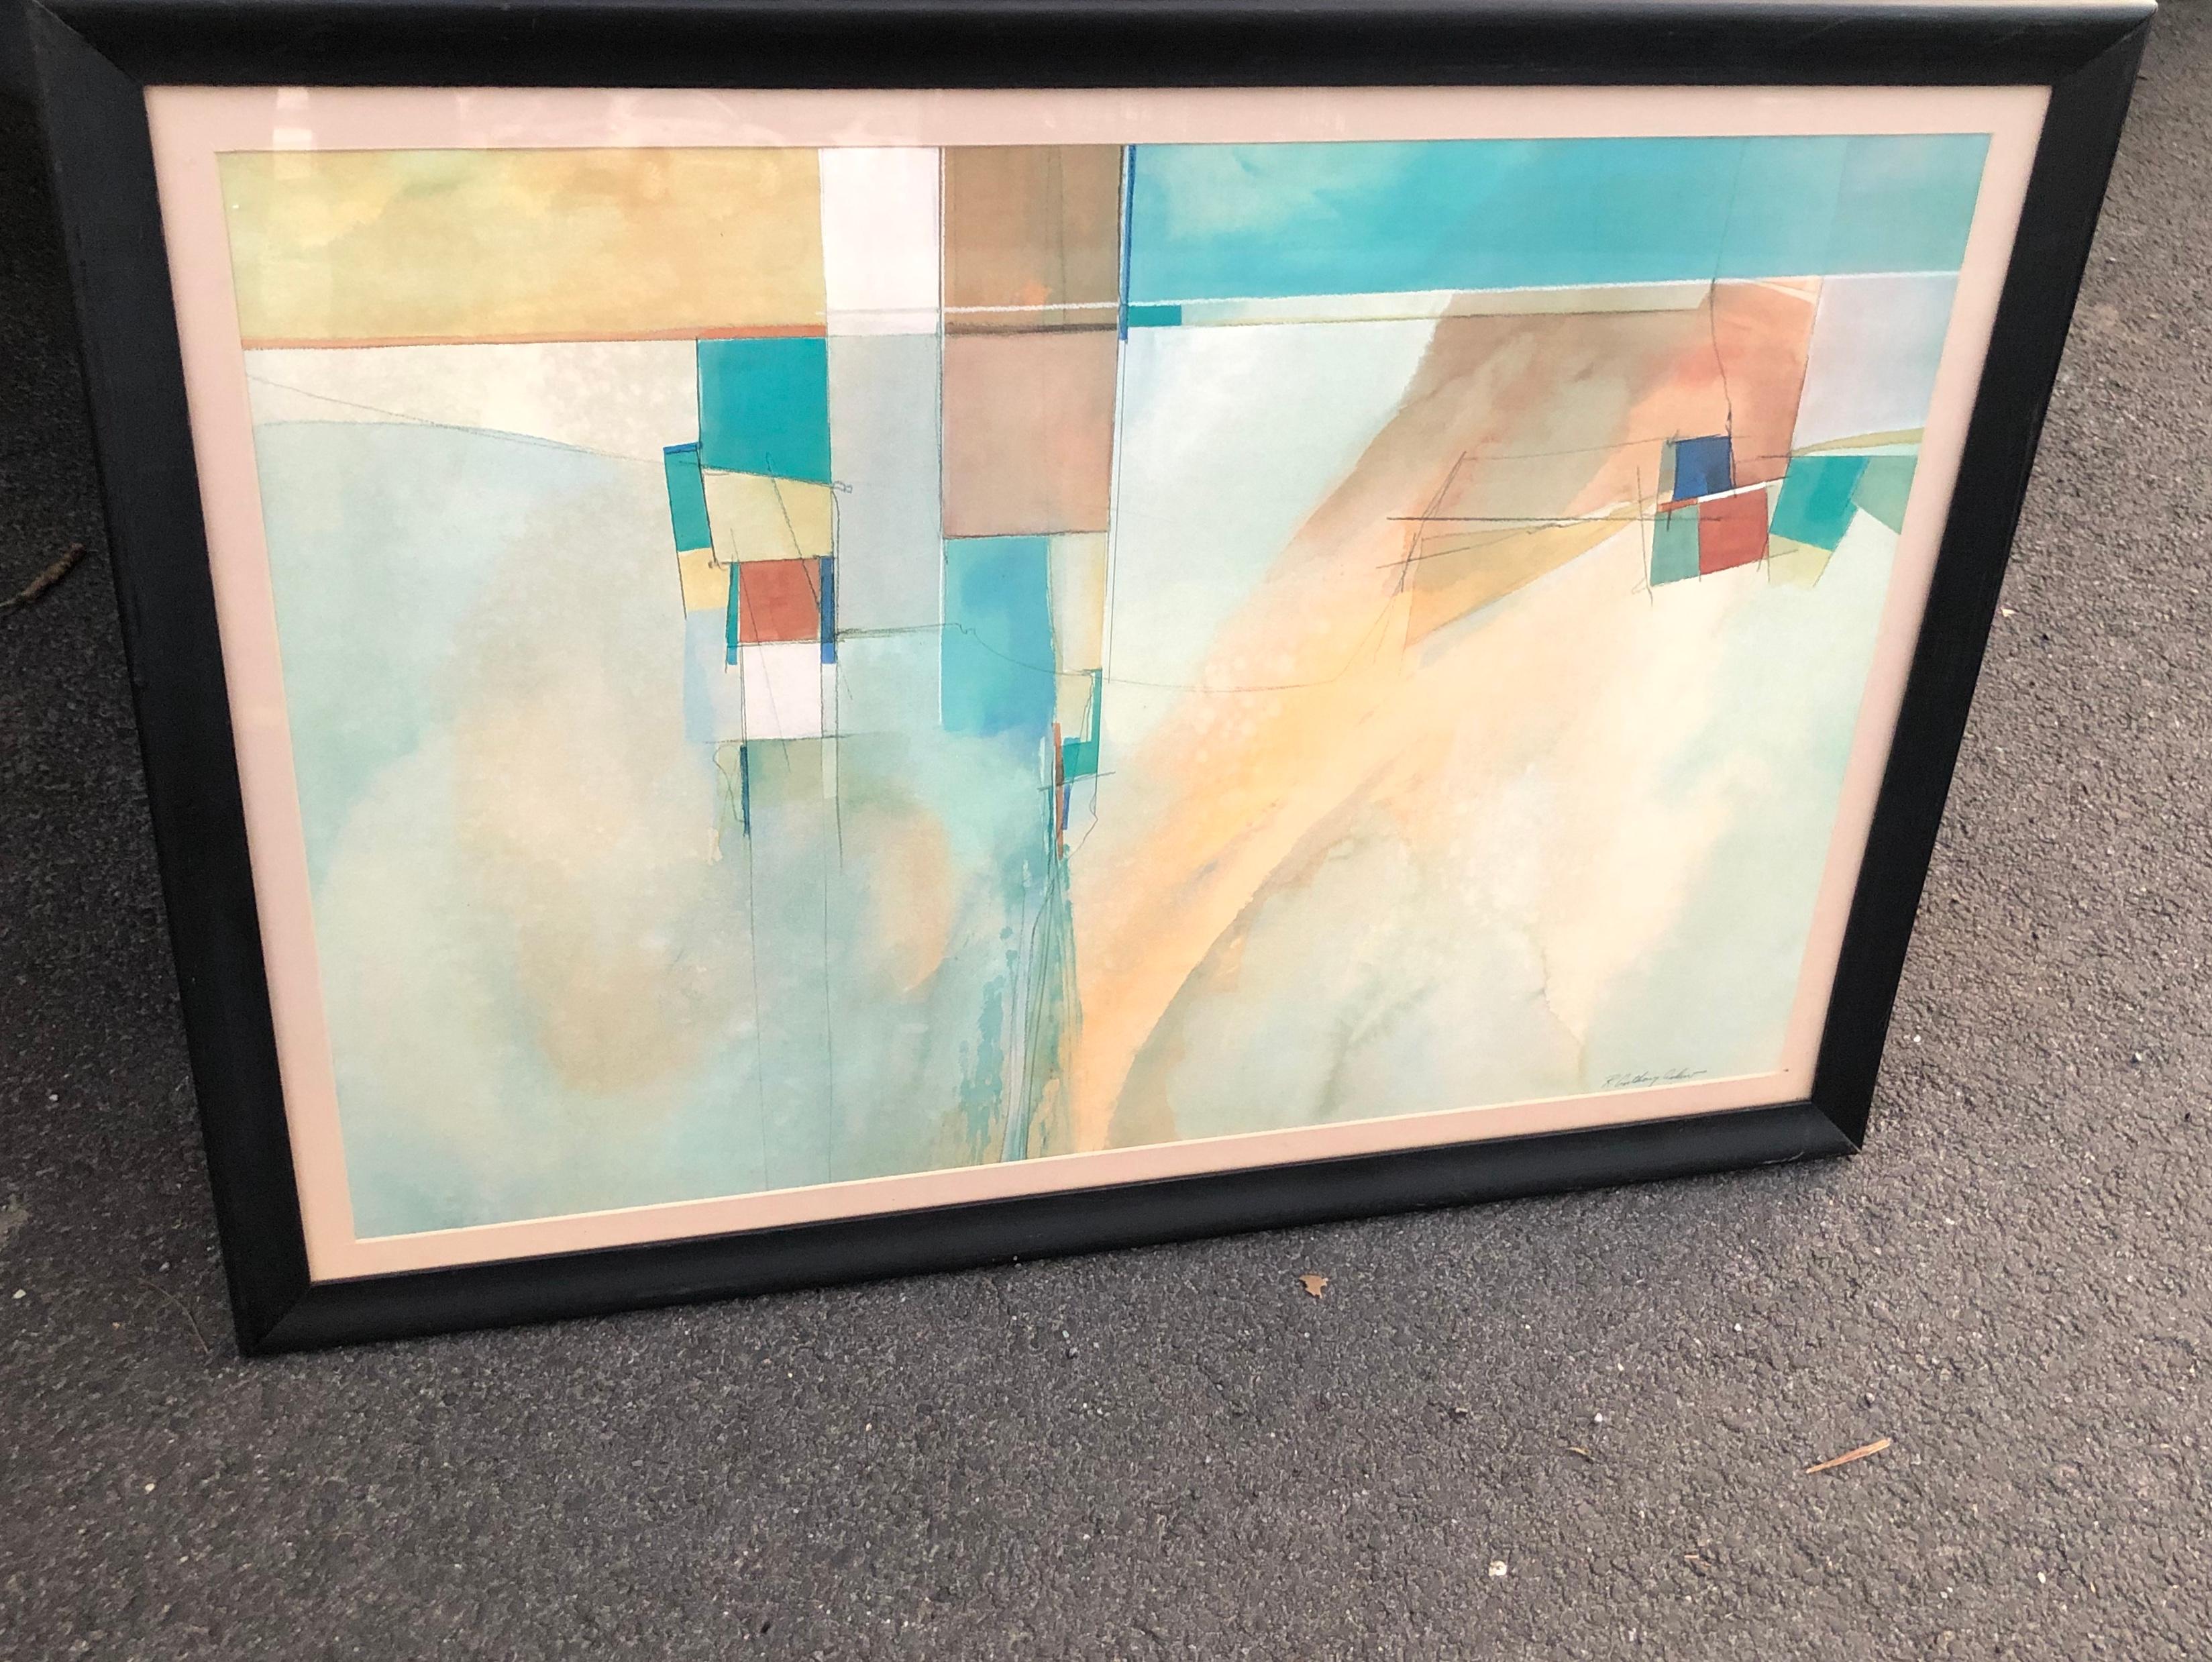 Framed midcentury abstract print by R. Anthony Askew. From Florida estate. In very good vintage condition ready to hang. 